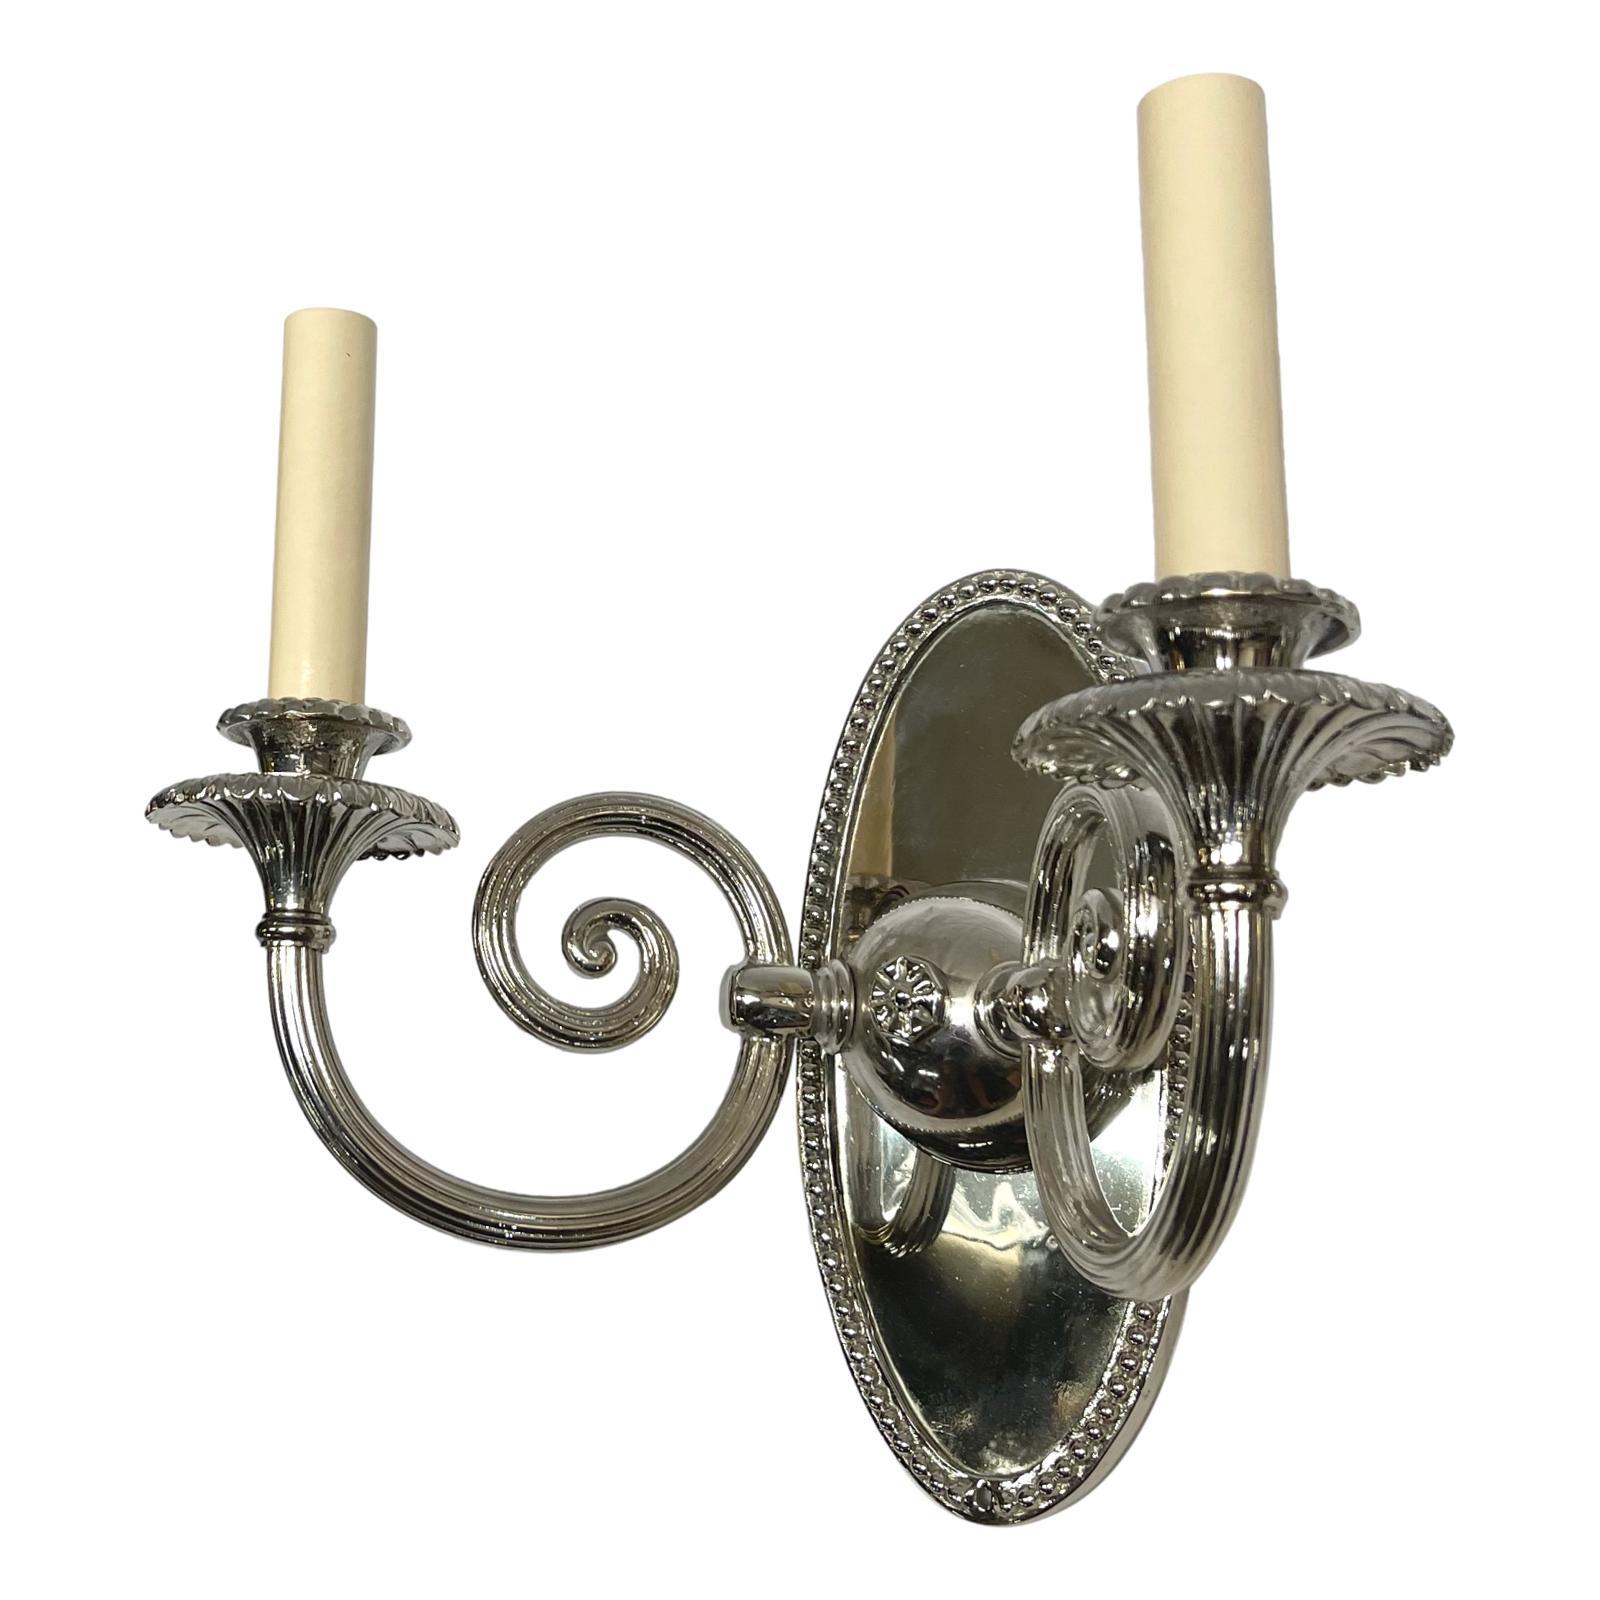 Pair of circa 1920’s French silver-plated two-light sconces.

Measurements:
Height: 10?
Width: 12?
Depth: 7?.